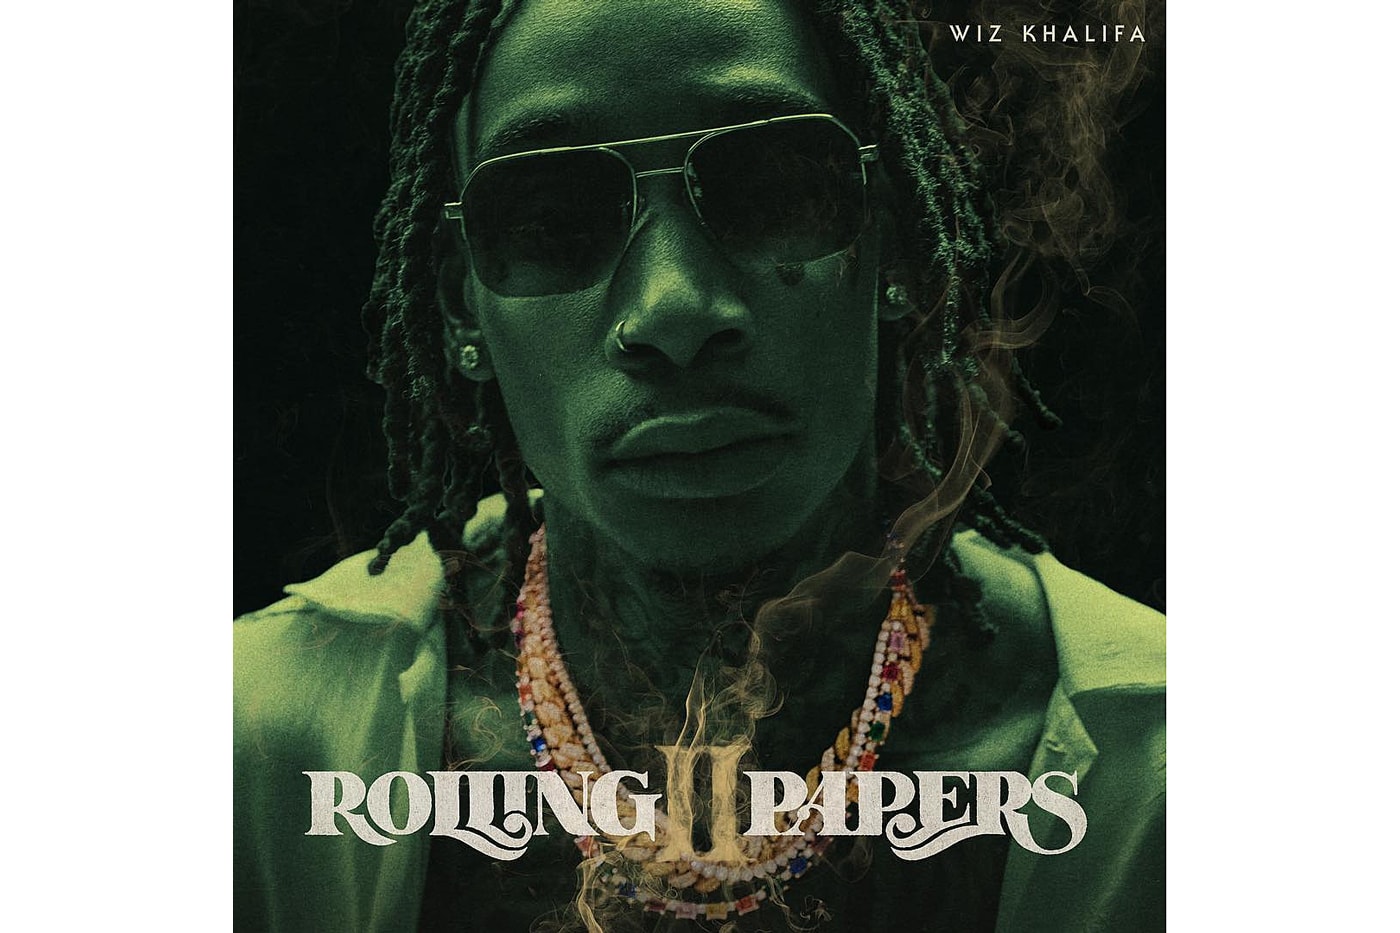 Wiz Khalifa New Album Rolling Papers 2 Swae Lee Snoop Dogg Ty Dolla $ign Gucci Mane PARTYNEXTDOOR taylor gang